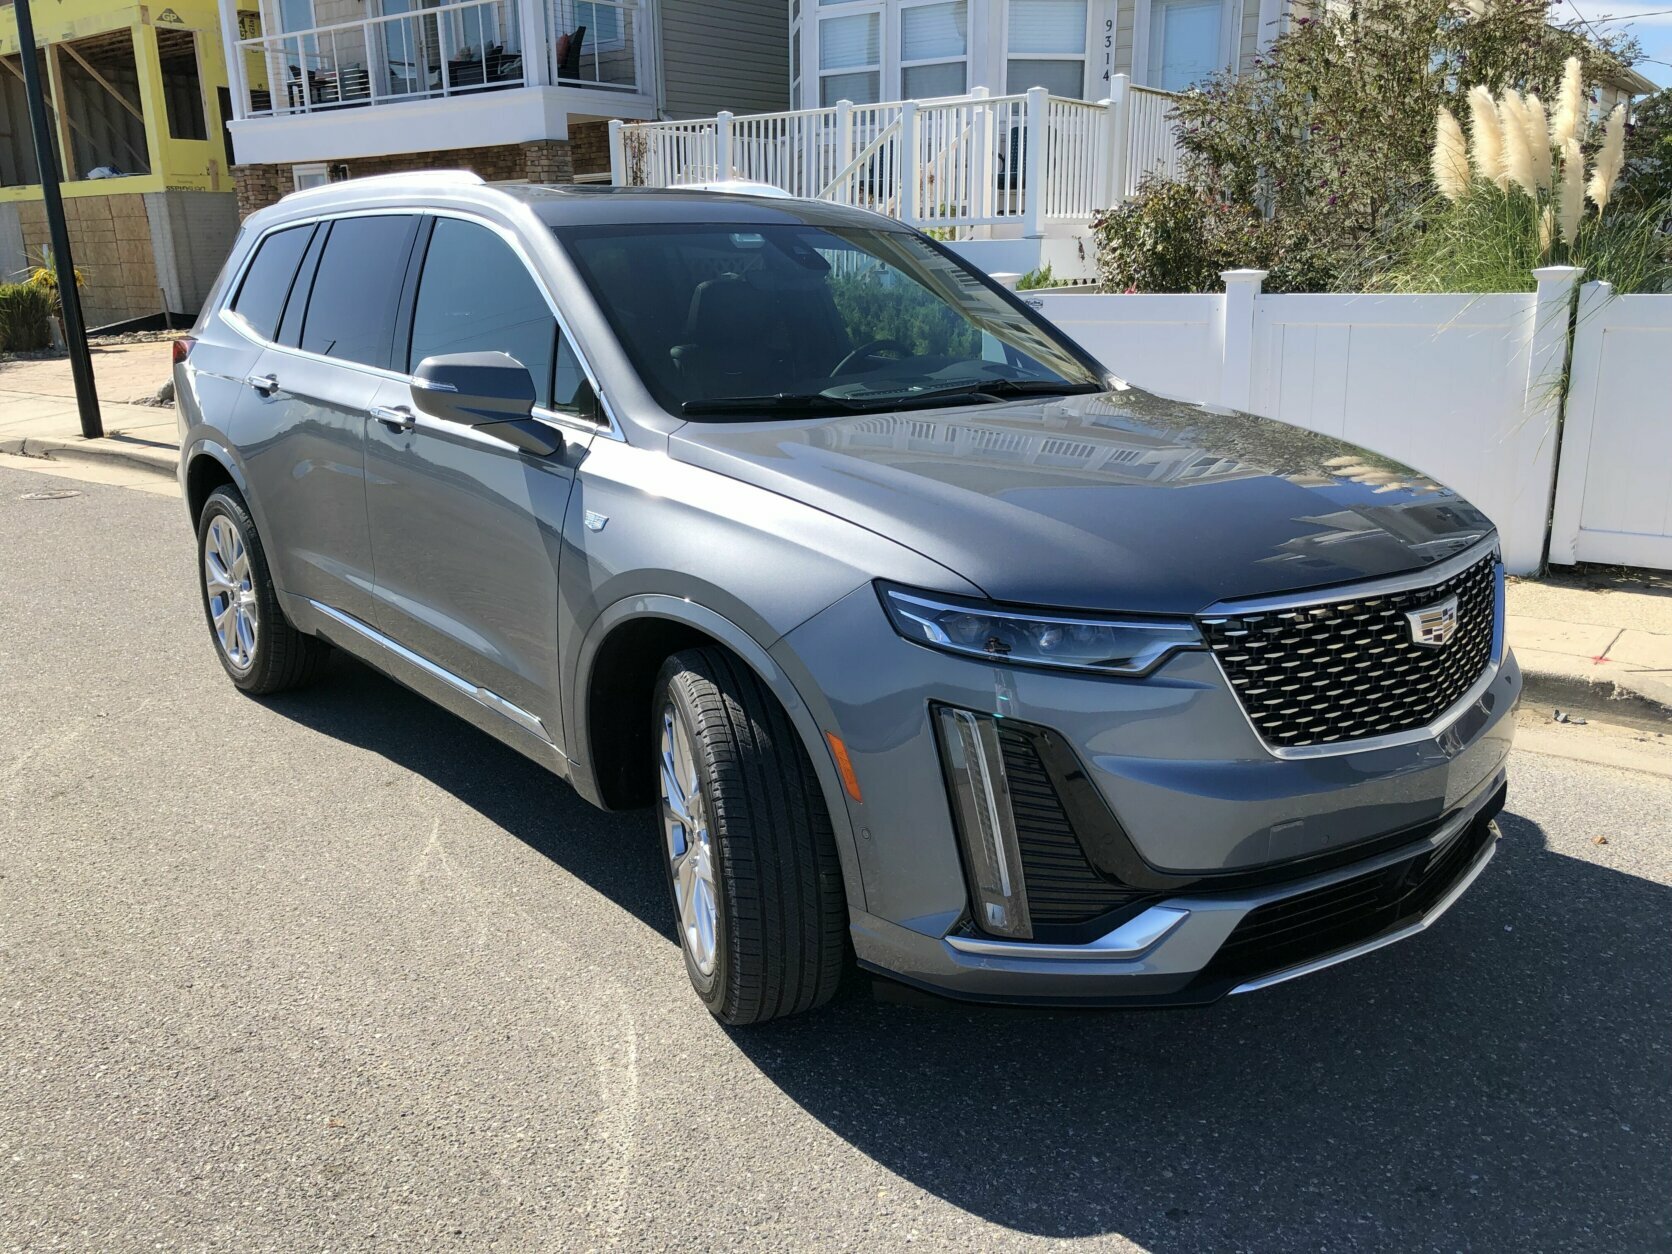 <p><strong>2020 Cadillac XT6</strong></p>
<p><strong>Price:</strong> Starting at $54,315</p>
<p>Our test vehicle didn’t come with a window sticker, but prices can easily rise to the mid-60s.</p>
